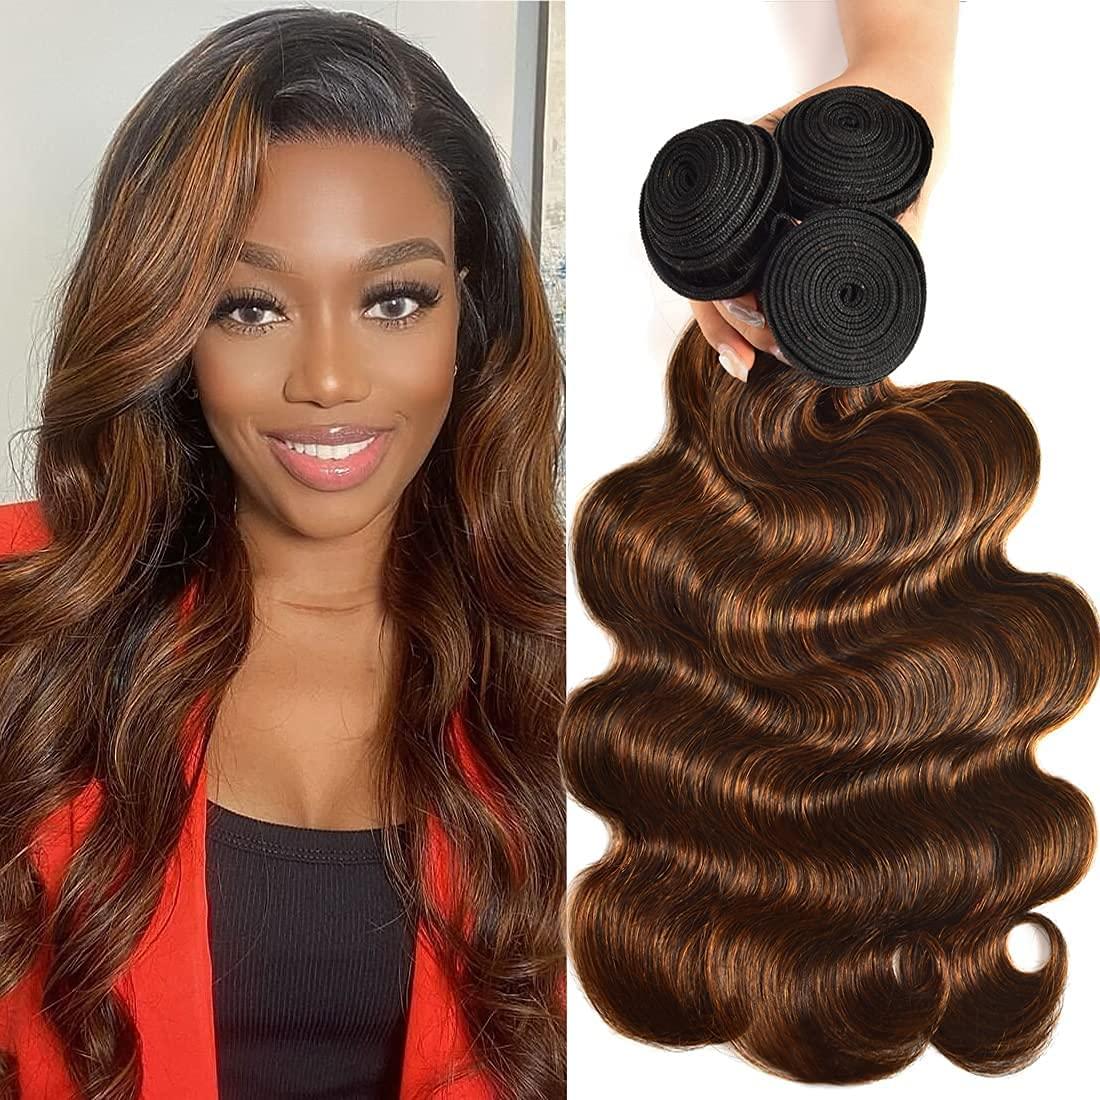 Unice Brown Highlight Body Wave Human Hair Weave 3 Bundles 14 16 16 Inches, Brazilian  Remy Hair Ombre Blonde Human Hair Wavy Weaves Sew In Fb30 Piano Color 14 16  16 Inch Brown Highlight Color